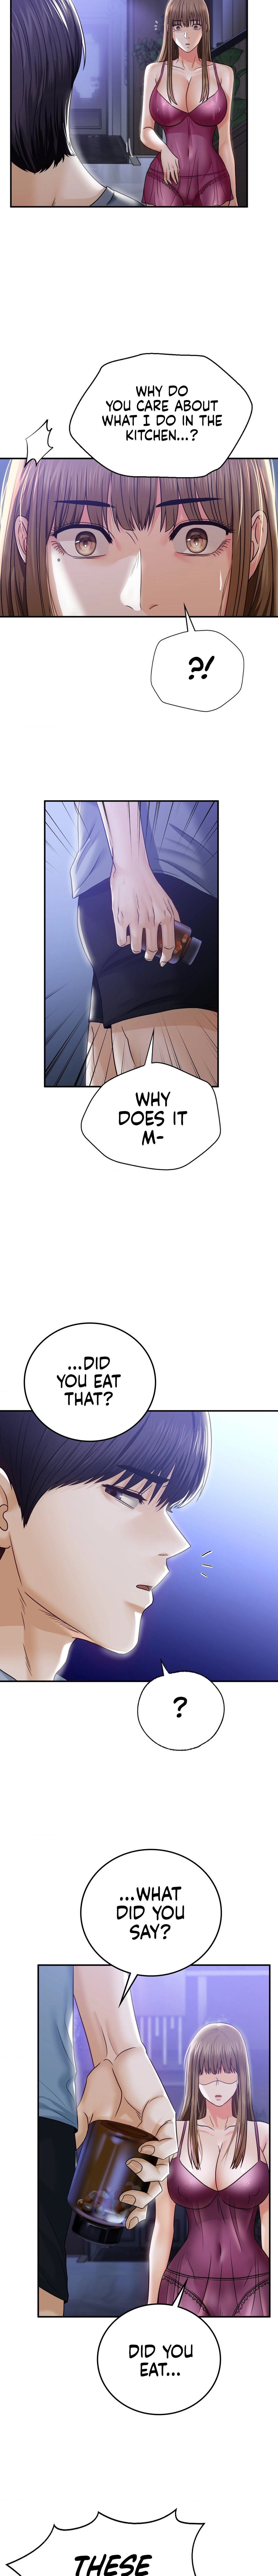 stepmothers-past-chap-2-5